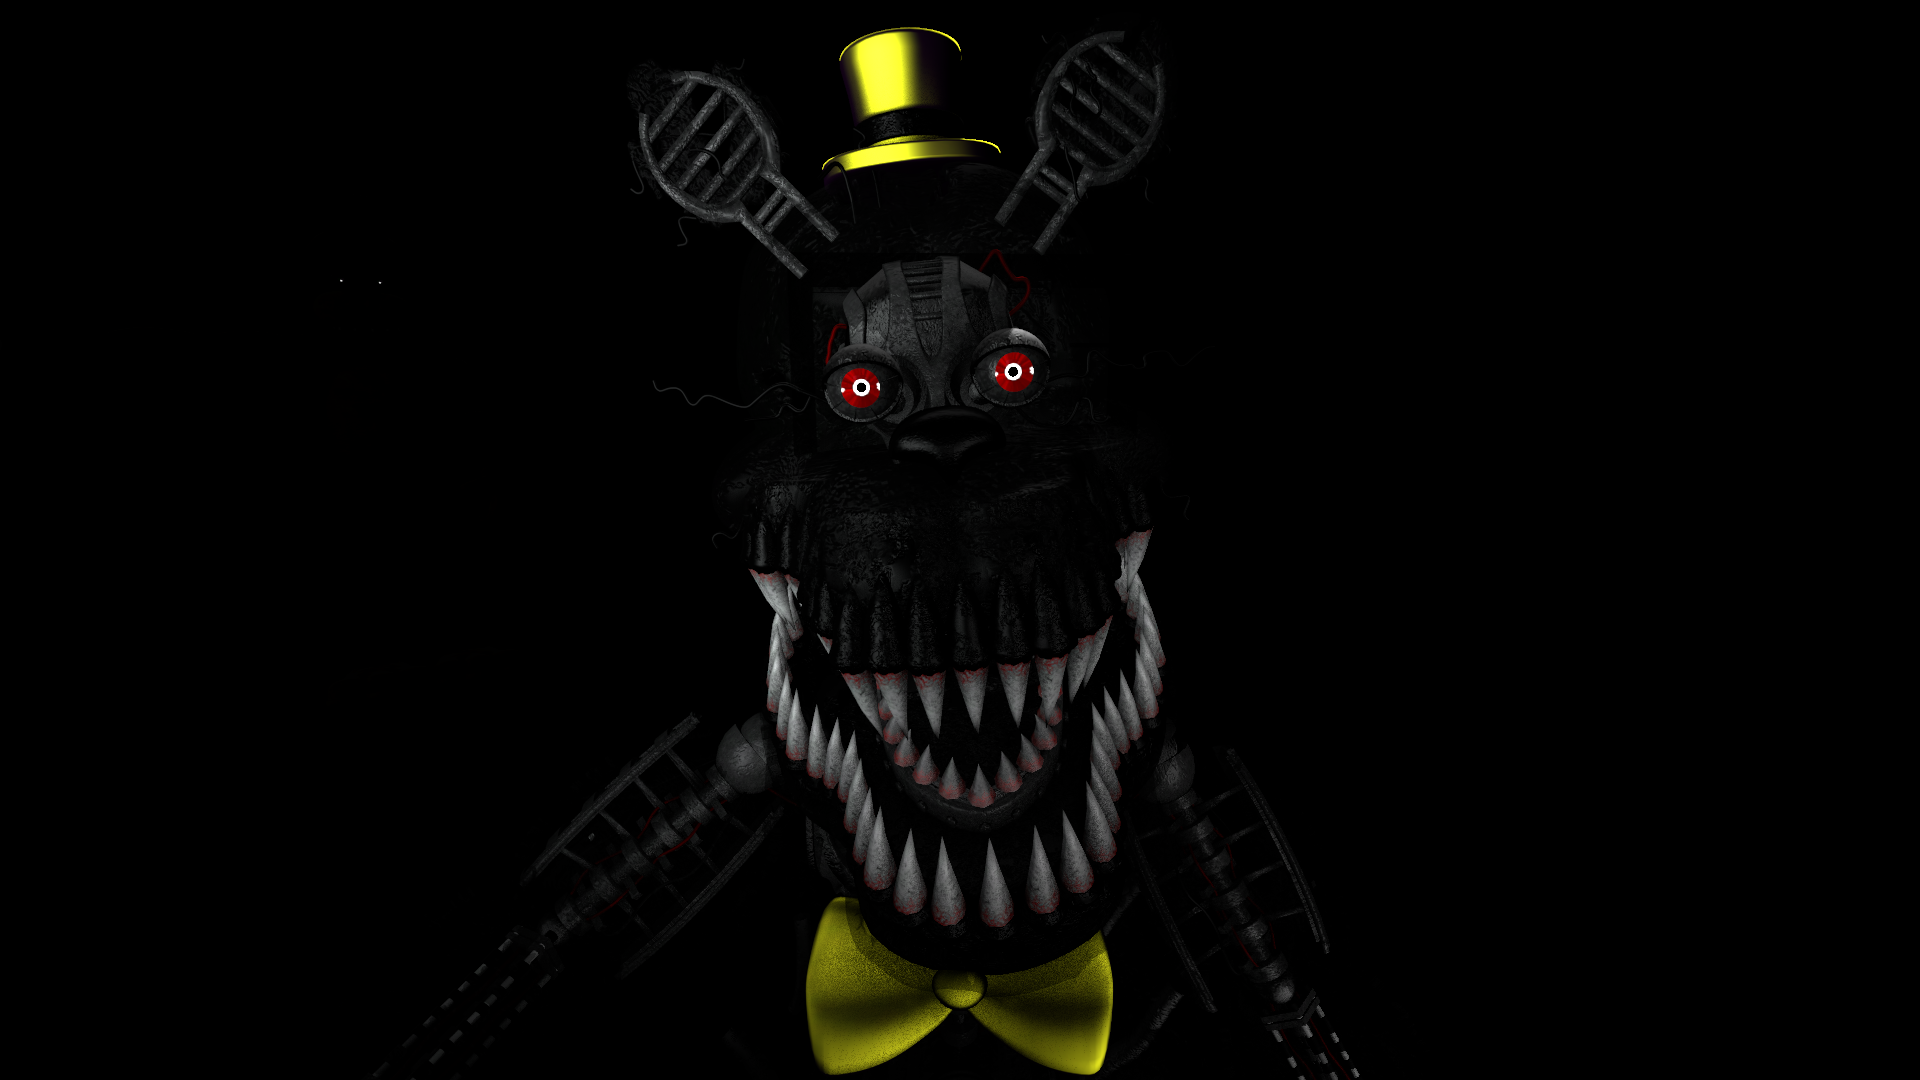 PC / Computer - Five Nights at Freddy's 4 - Nightmare Chica - The